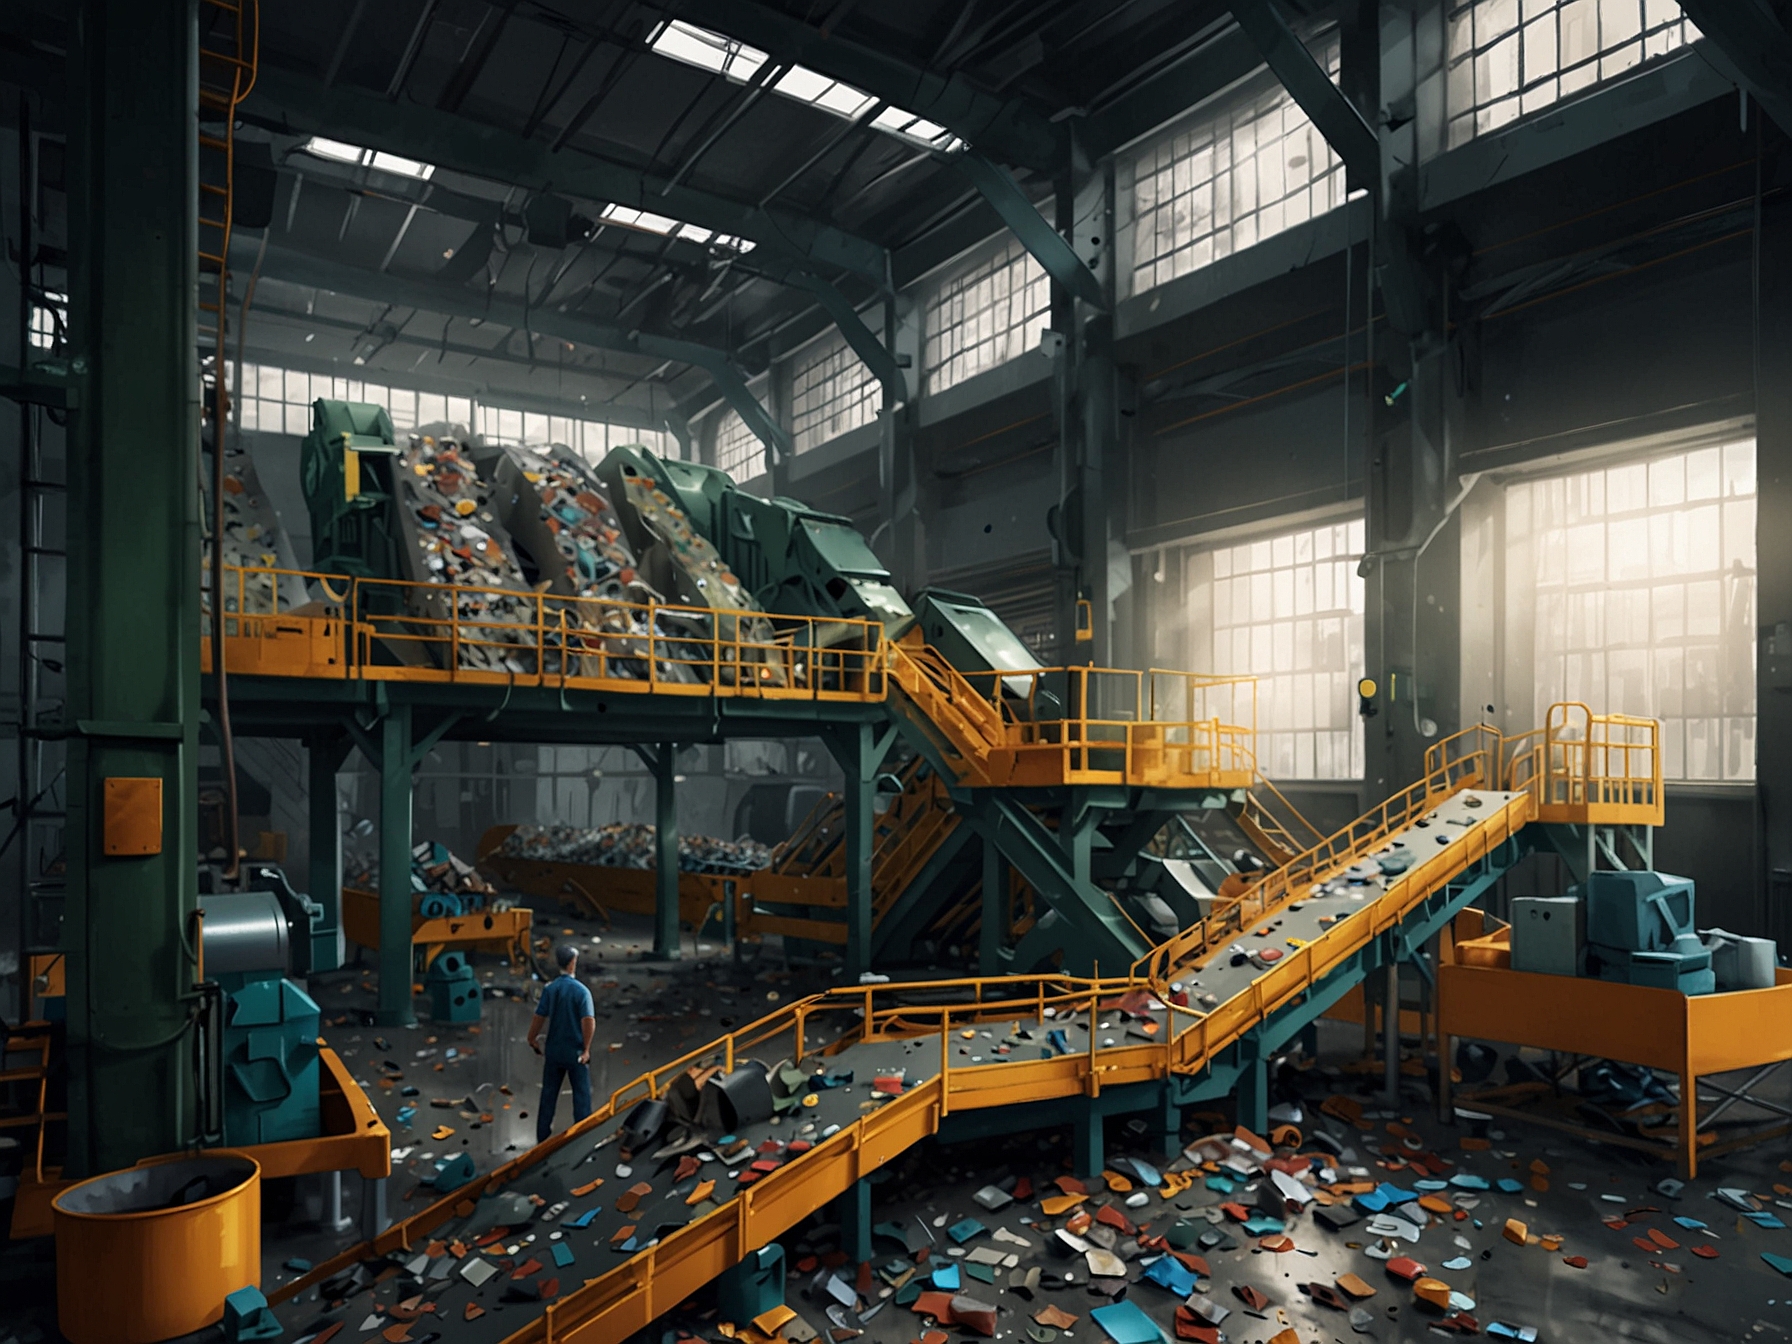 An image showcasing a recycling facility with advanced machinery sorting and processing various types of plastic waste, illustrating the industry's focus on improving recycling technologies.